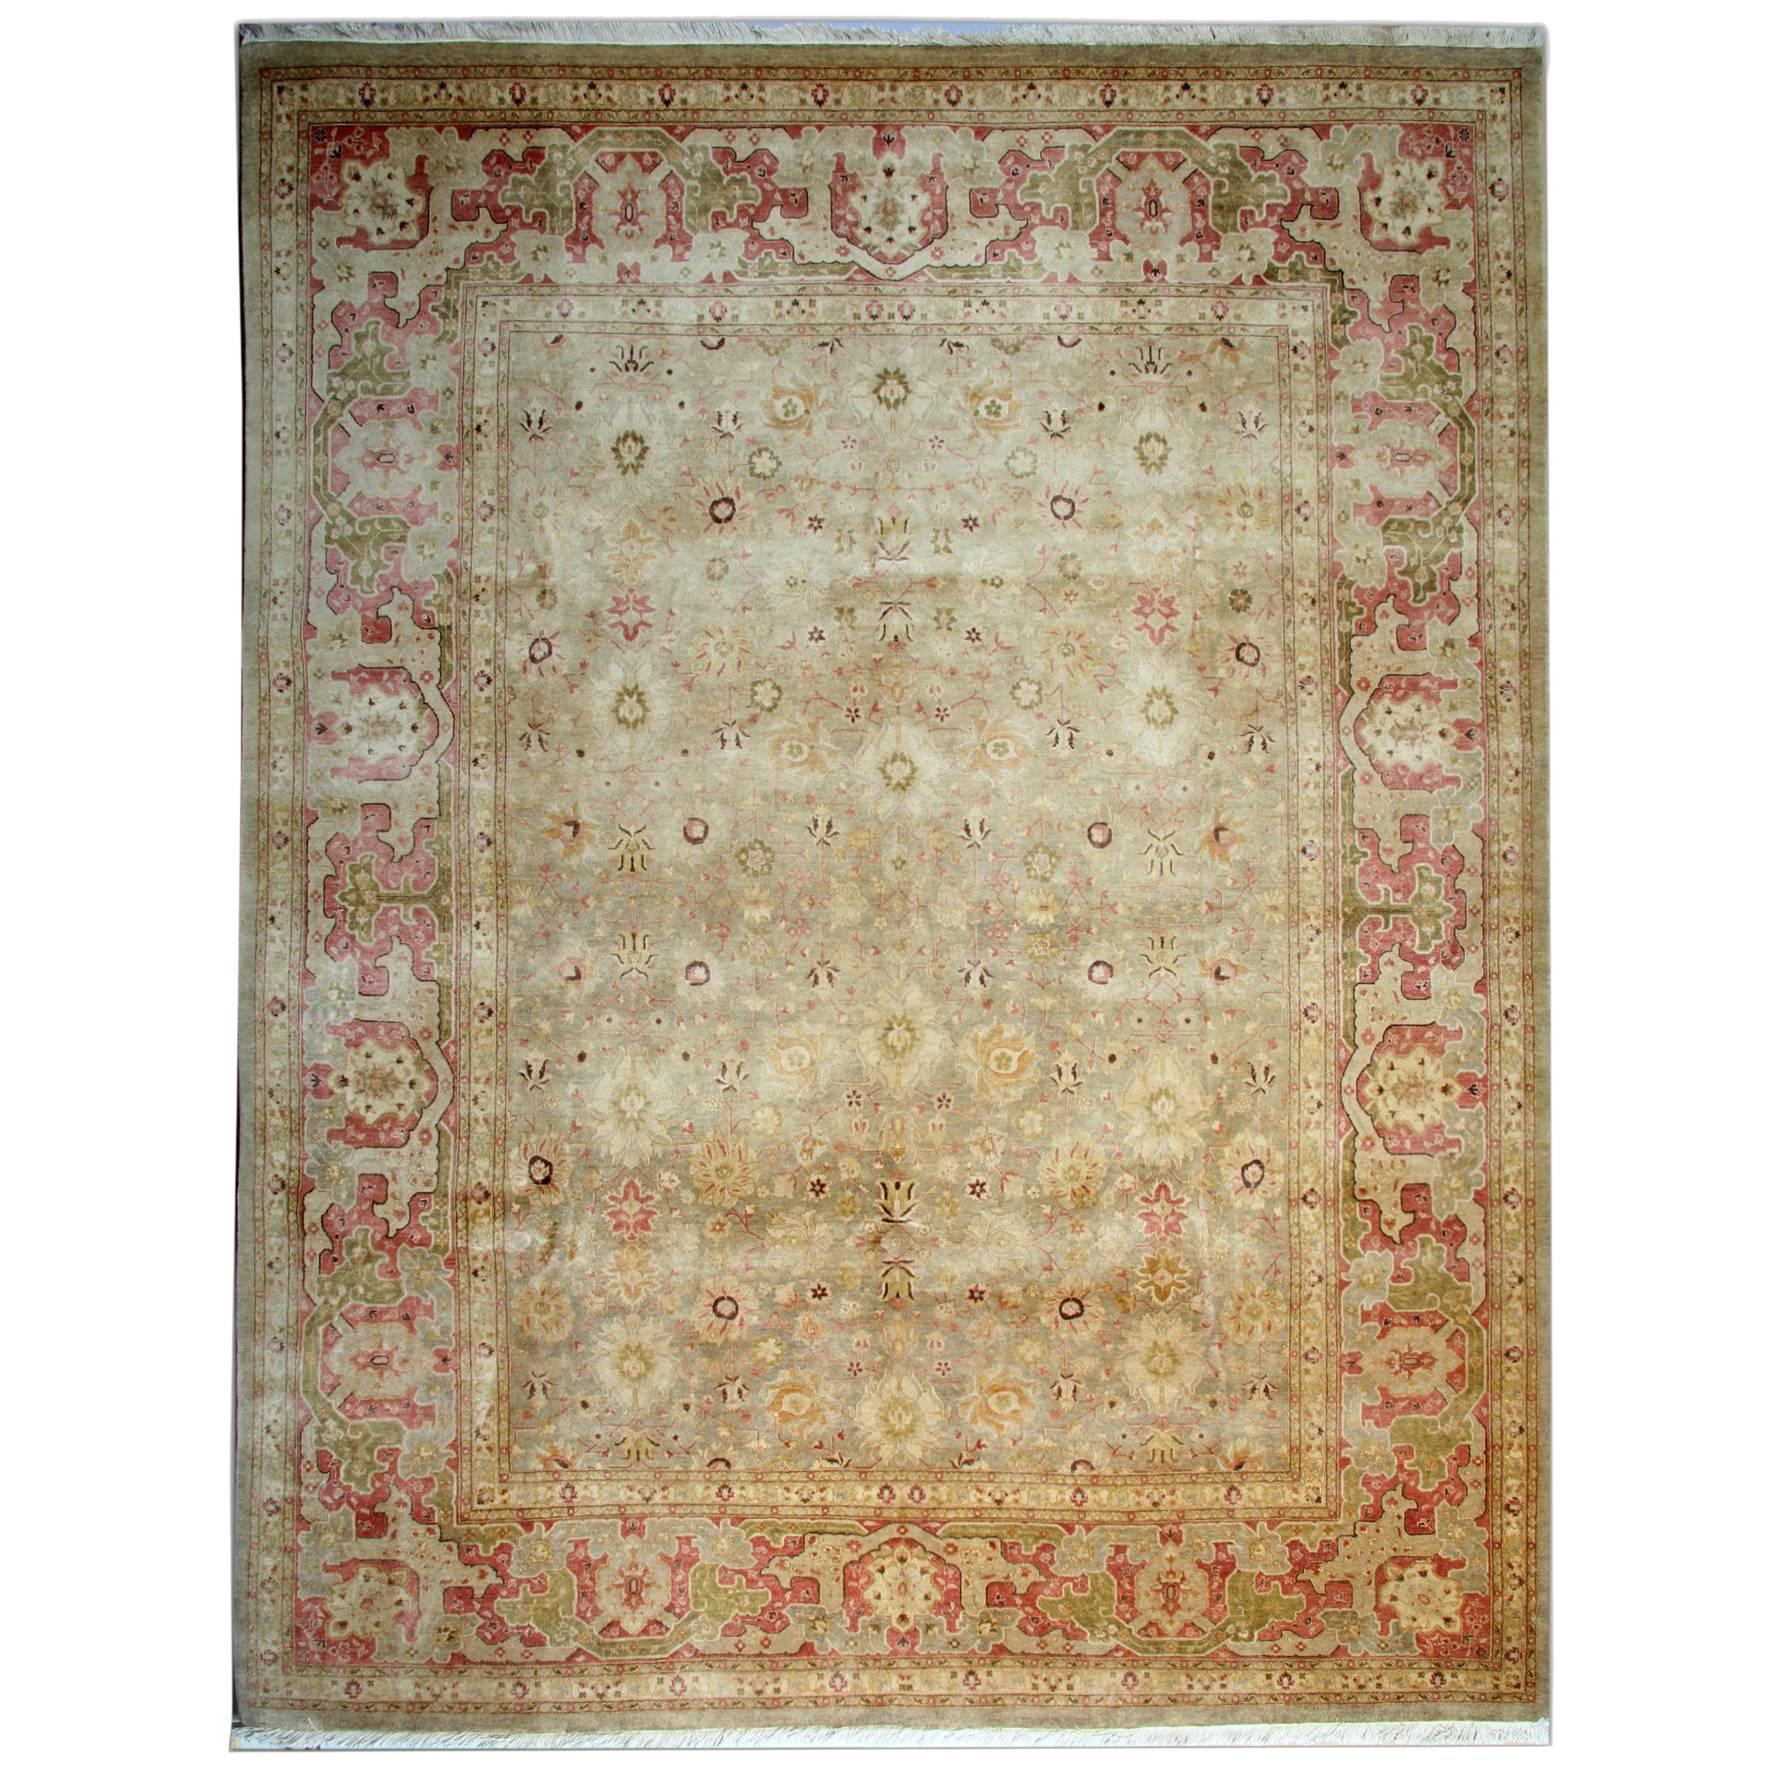 Magnificent Ziegler Mahal Persian style rugs, Carpet from Sultanabad